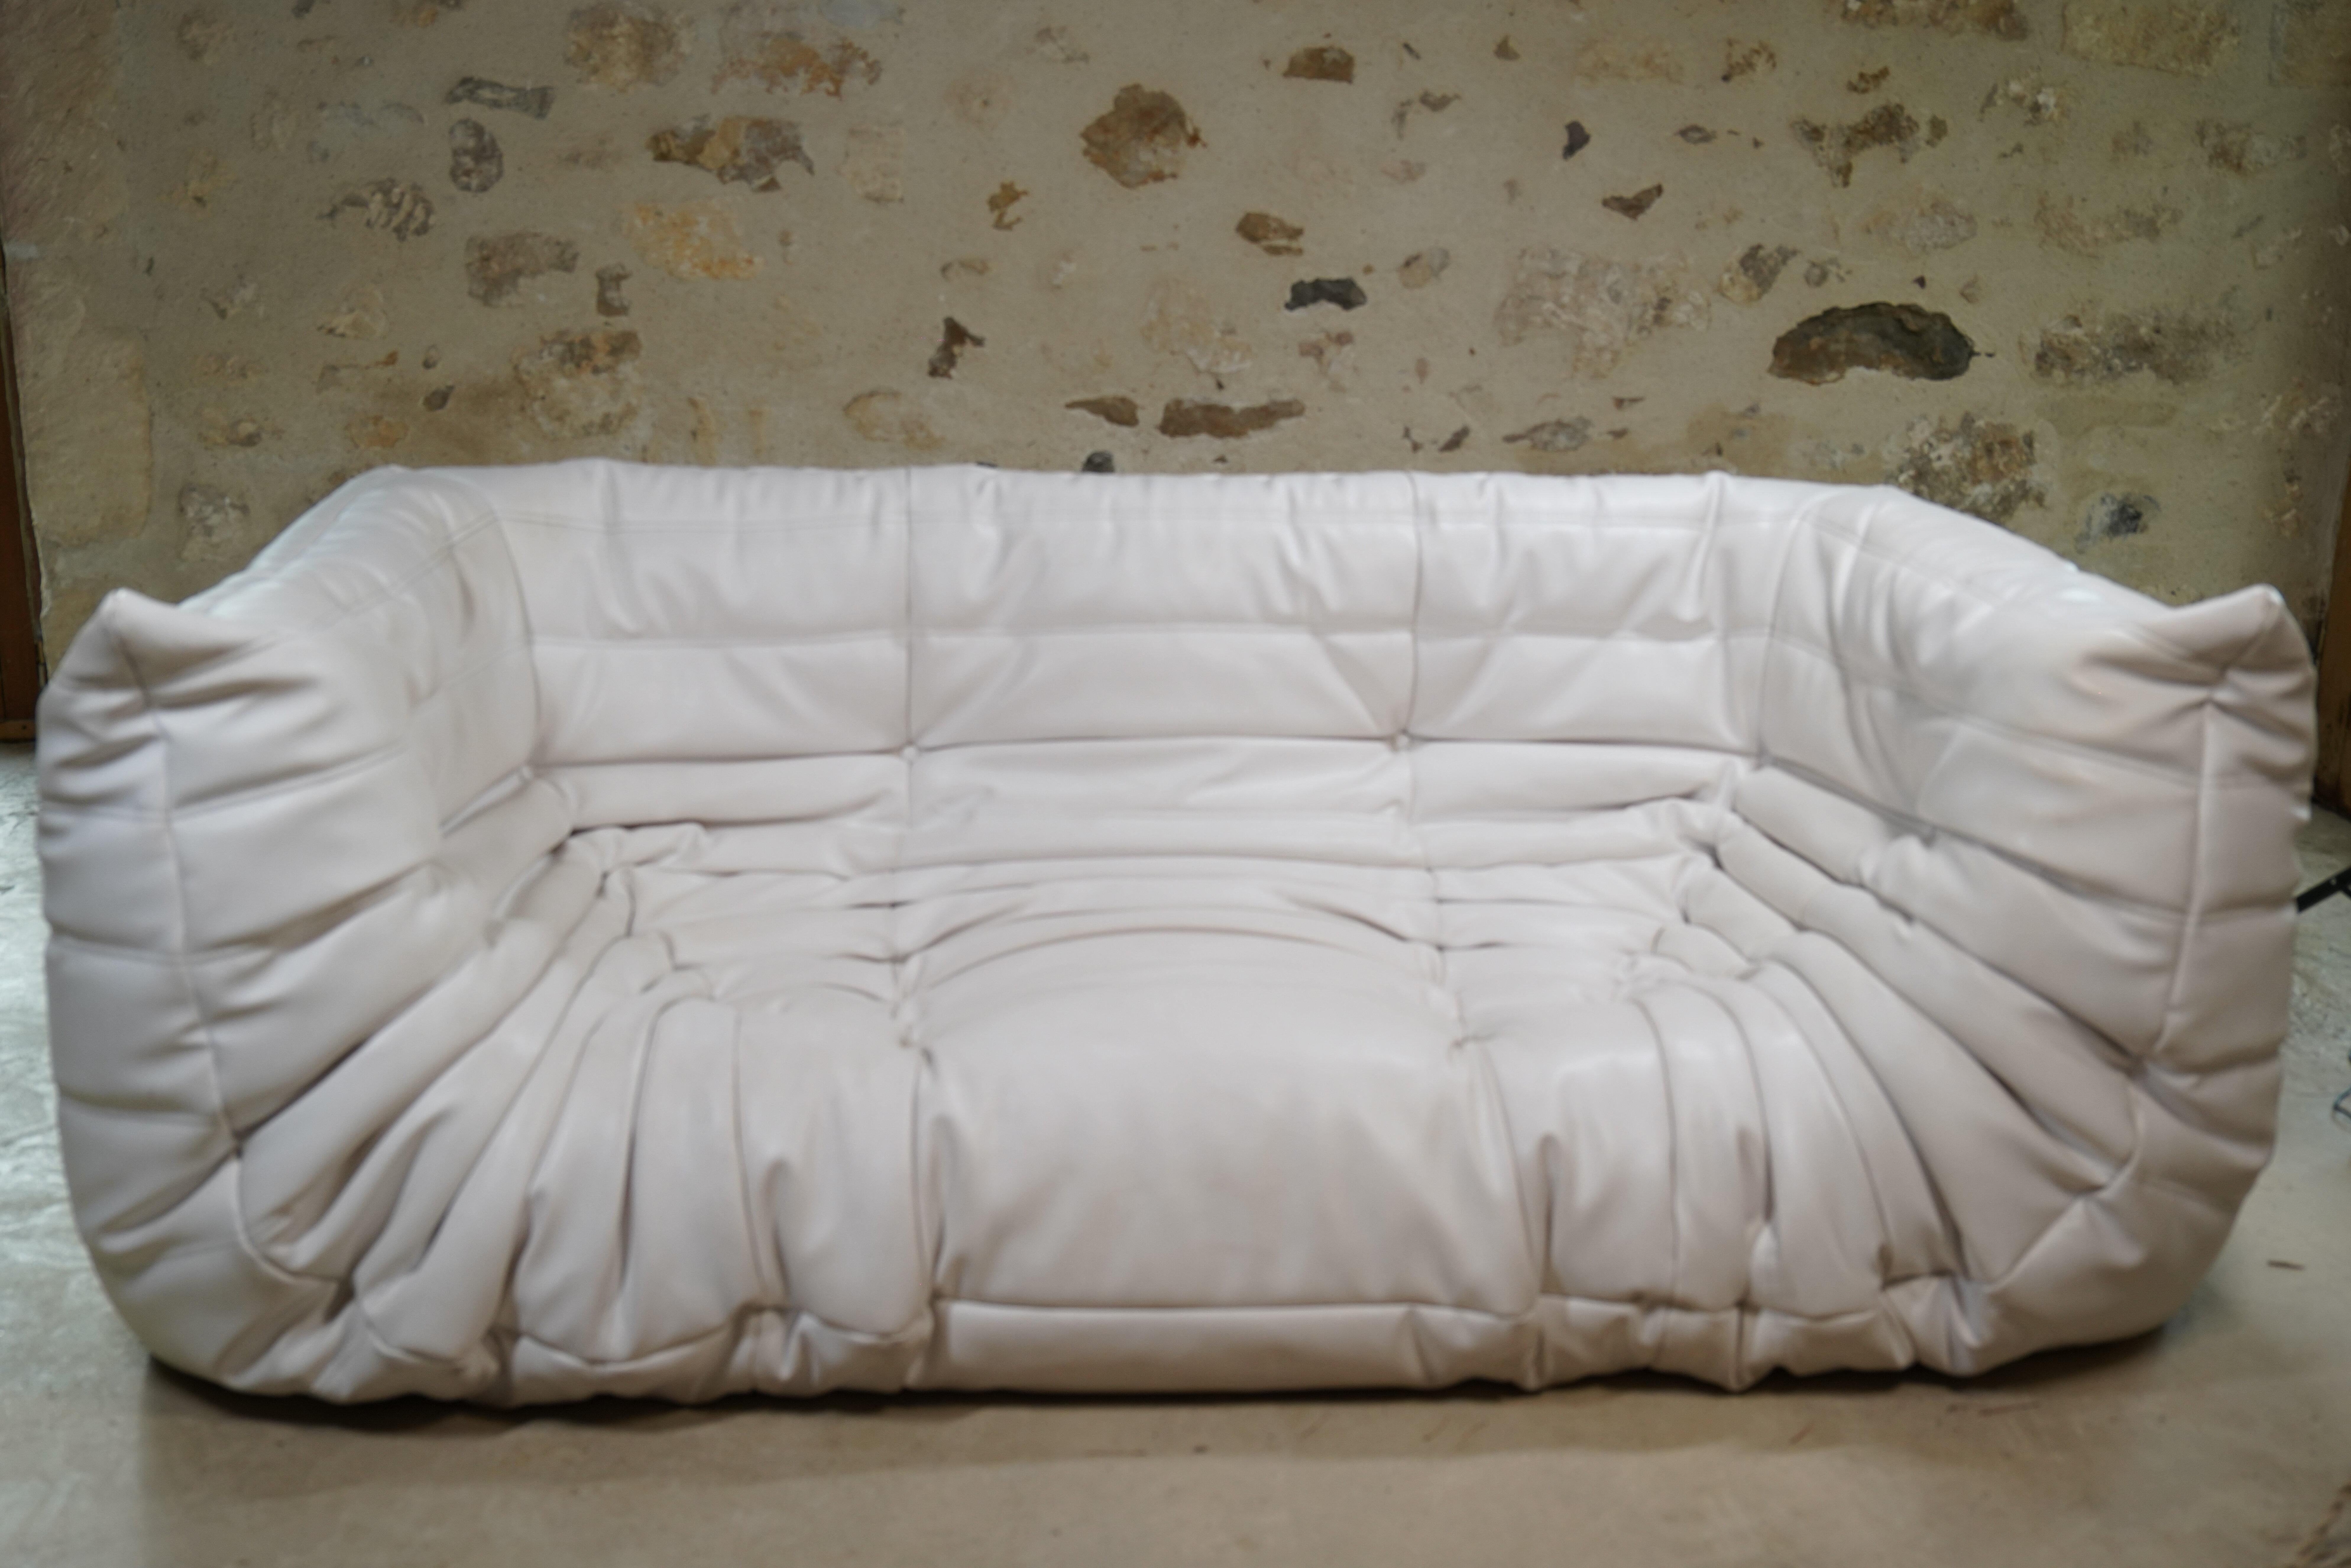 Gorgeous three-seater white leather Togo sofa designed by Michel Ducaroy for Ligne Roset from 2007. (2 available - another in separate listing).

Designer Michel Ducaroy drew inspiration for the Togo's design from an aluminum toothpaste tube